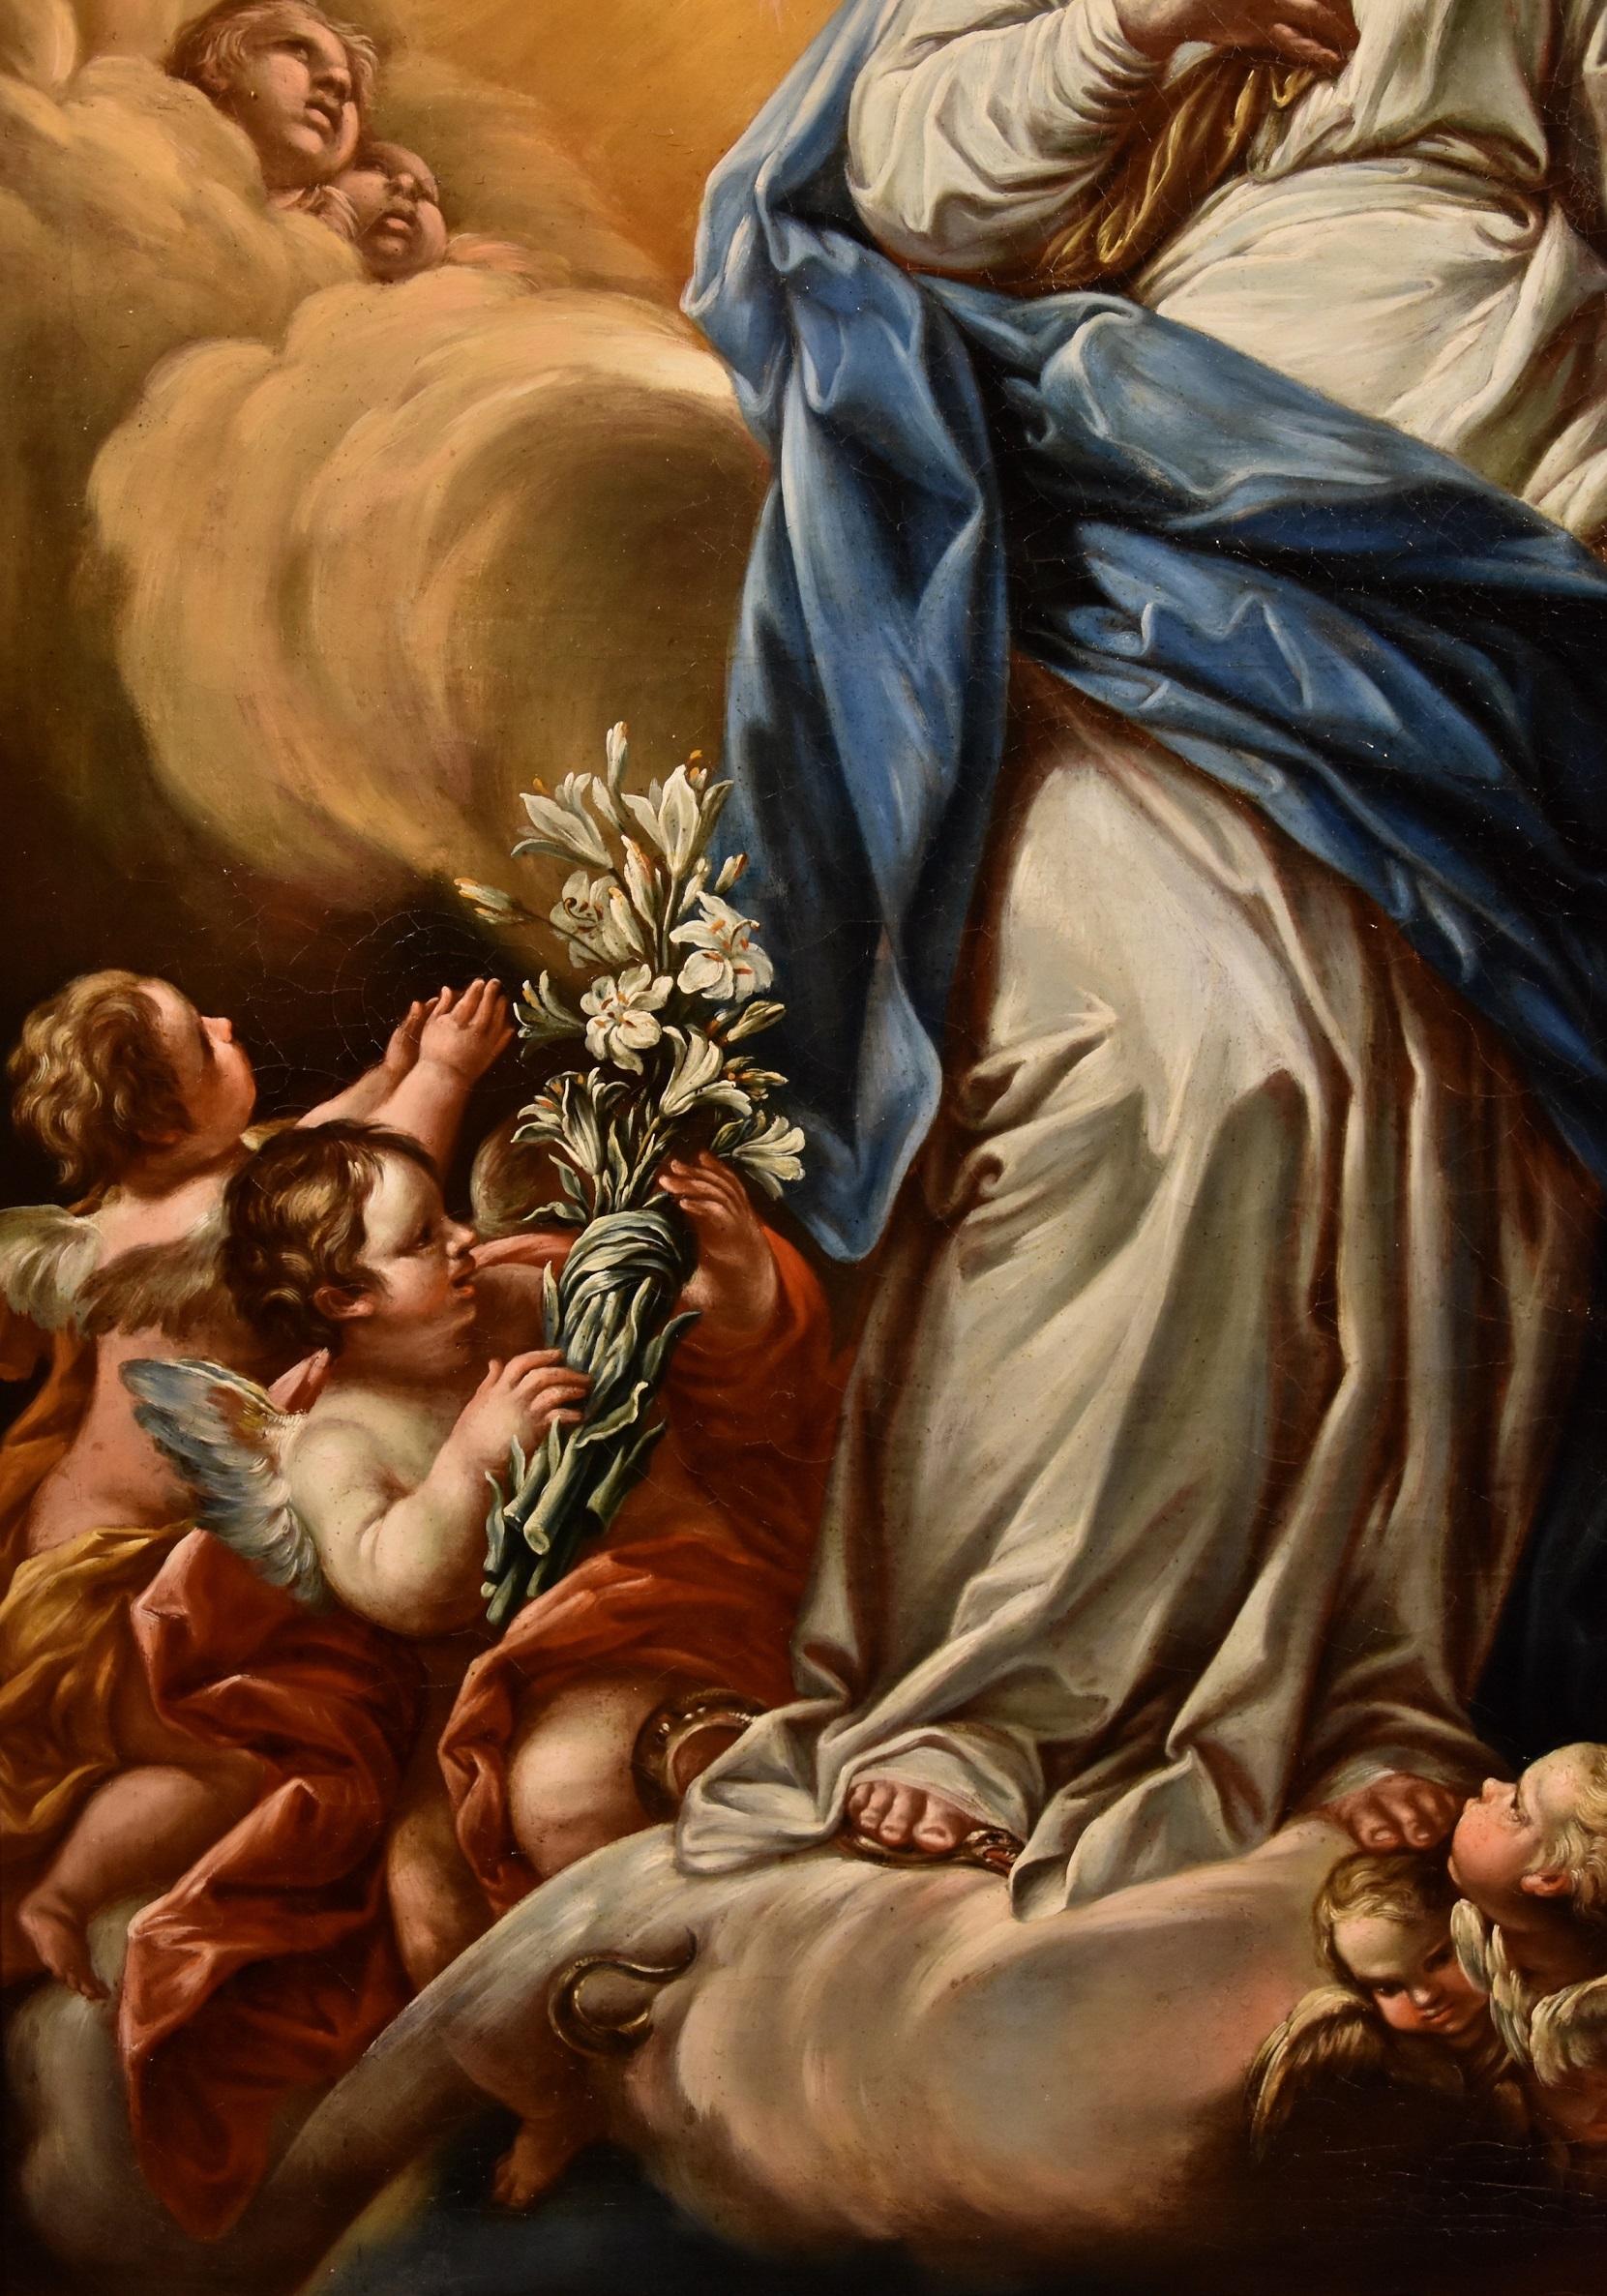 Giacinto Brandi (Rome 1621 - Rome 1691) - Immaculate Virgin
Oil painting on canvas (cm. 106 x 77, framed 121 x 92)
The work is accompanied by a critical study written by prof. Emilio Negro (Bologna)

We offer in our gallery this splendid painting,